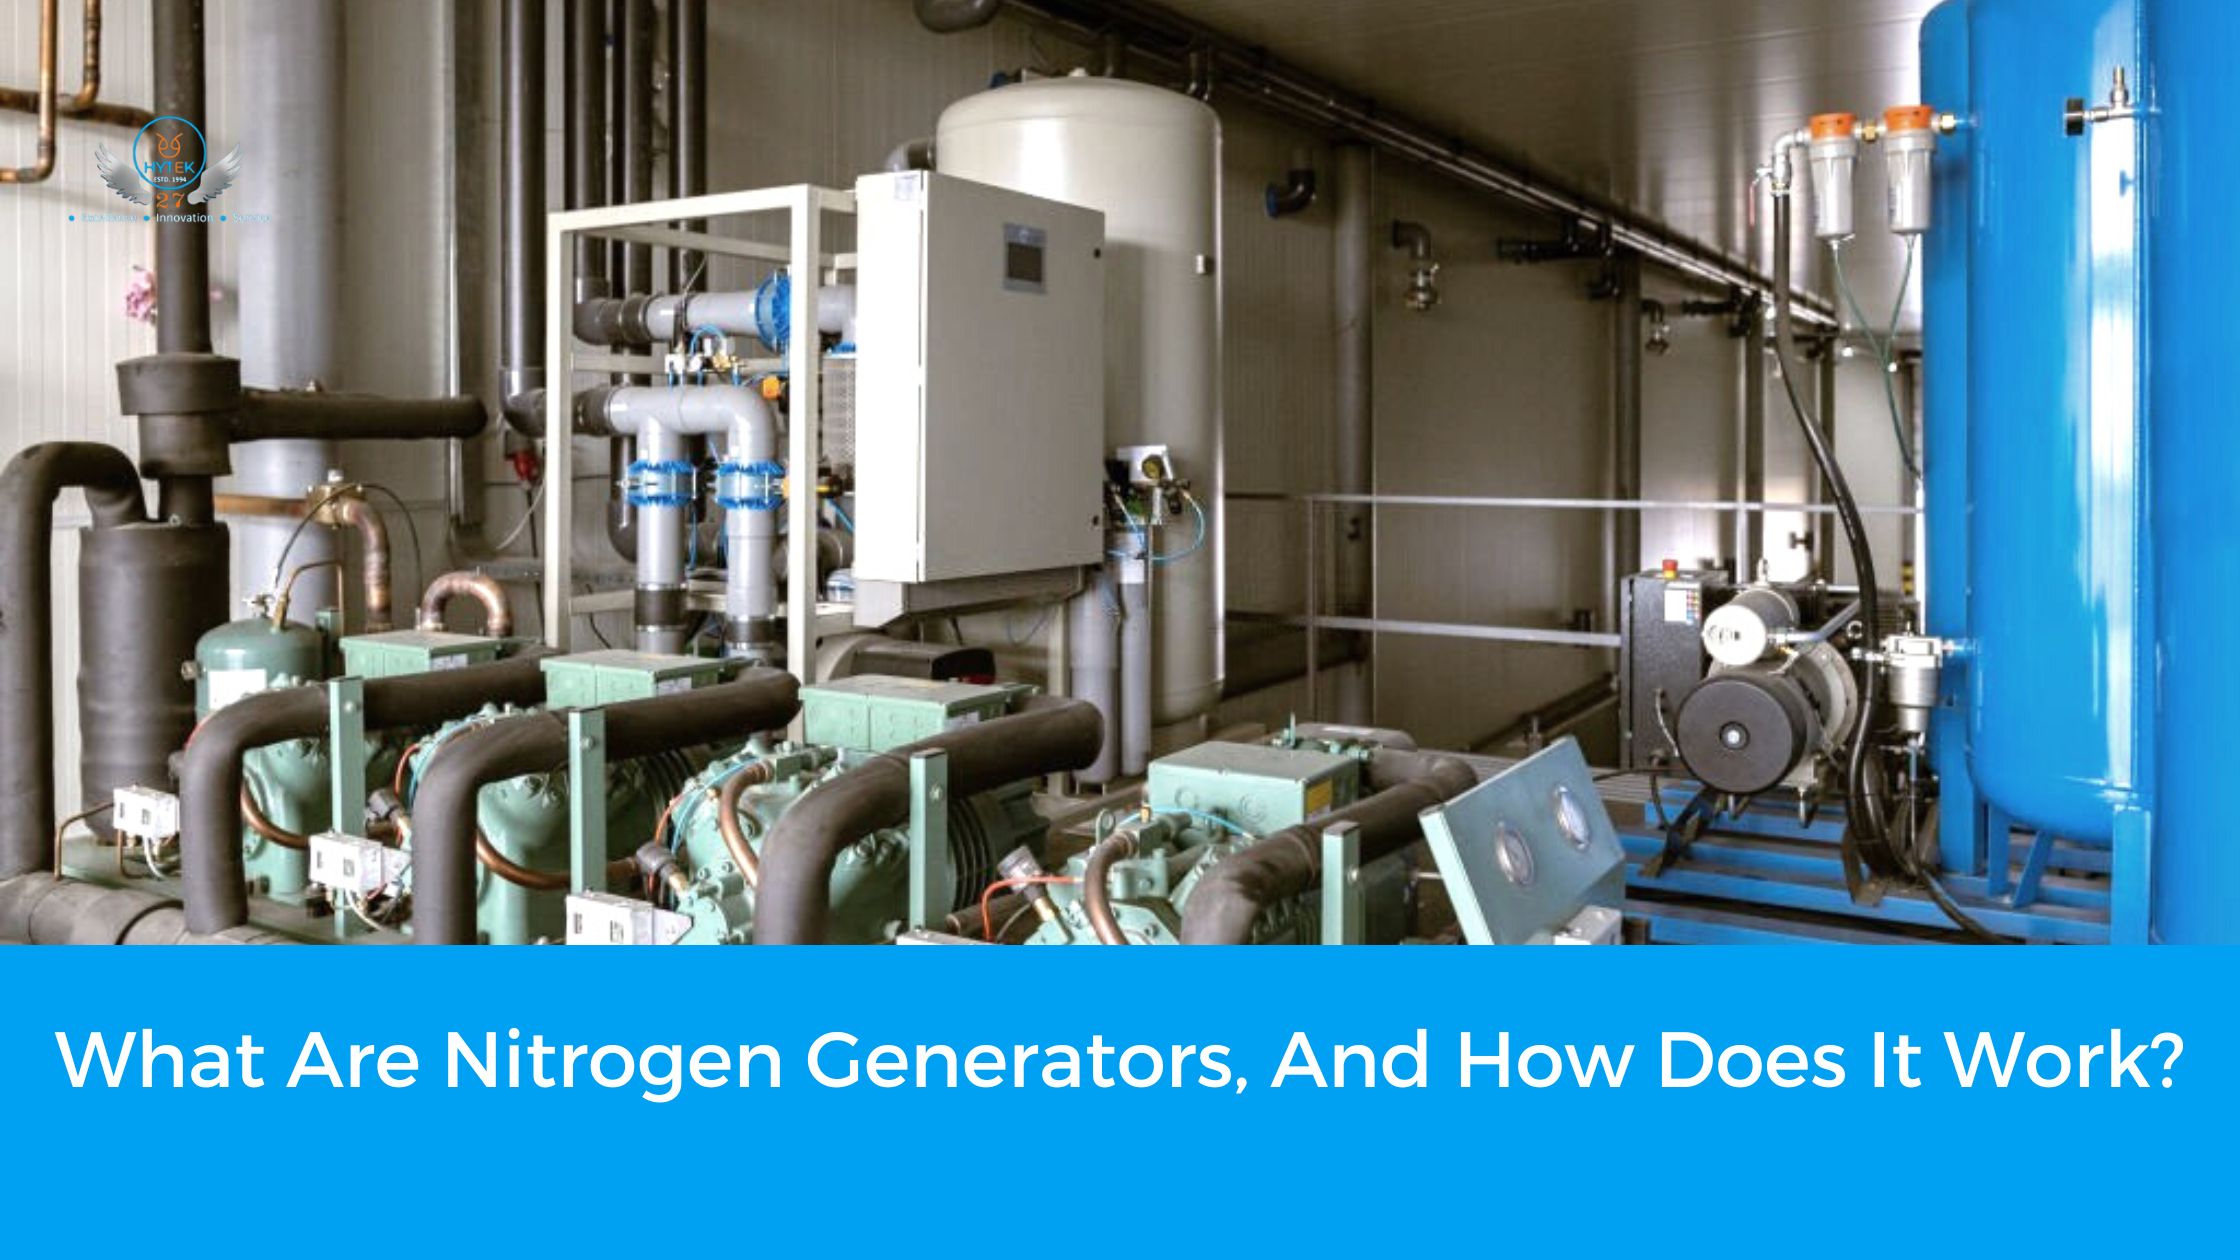 What is Nitrogen Generators, and how does it work